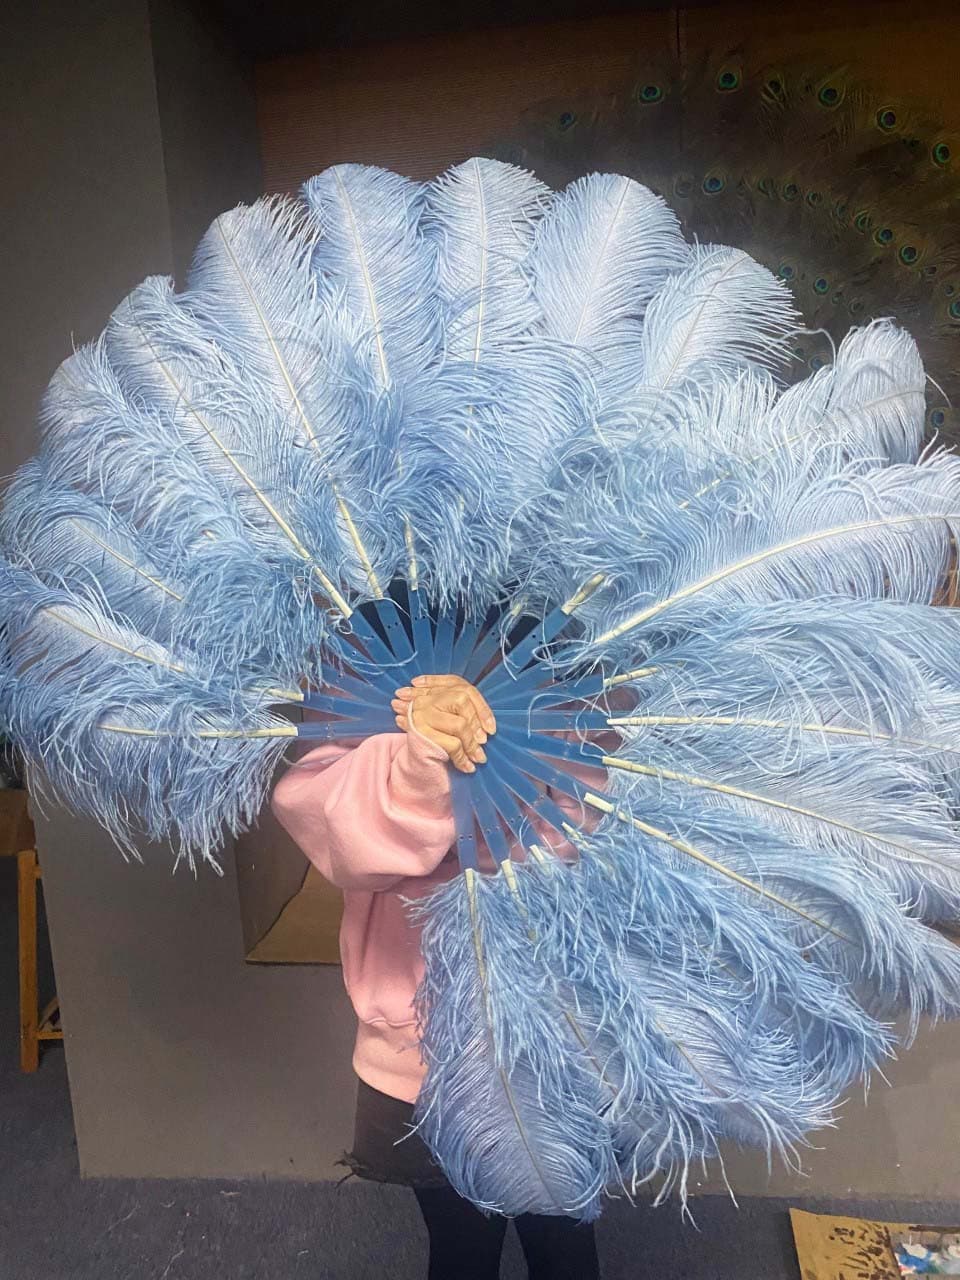 hotfans Baby Blue Marabou Ostrich Feather Fan 24x 43 with Travel Leather Bag for A Pair